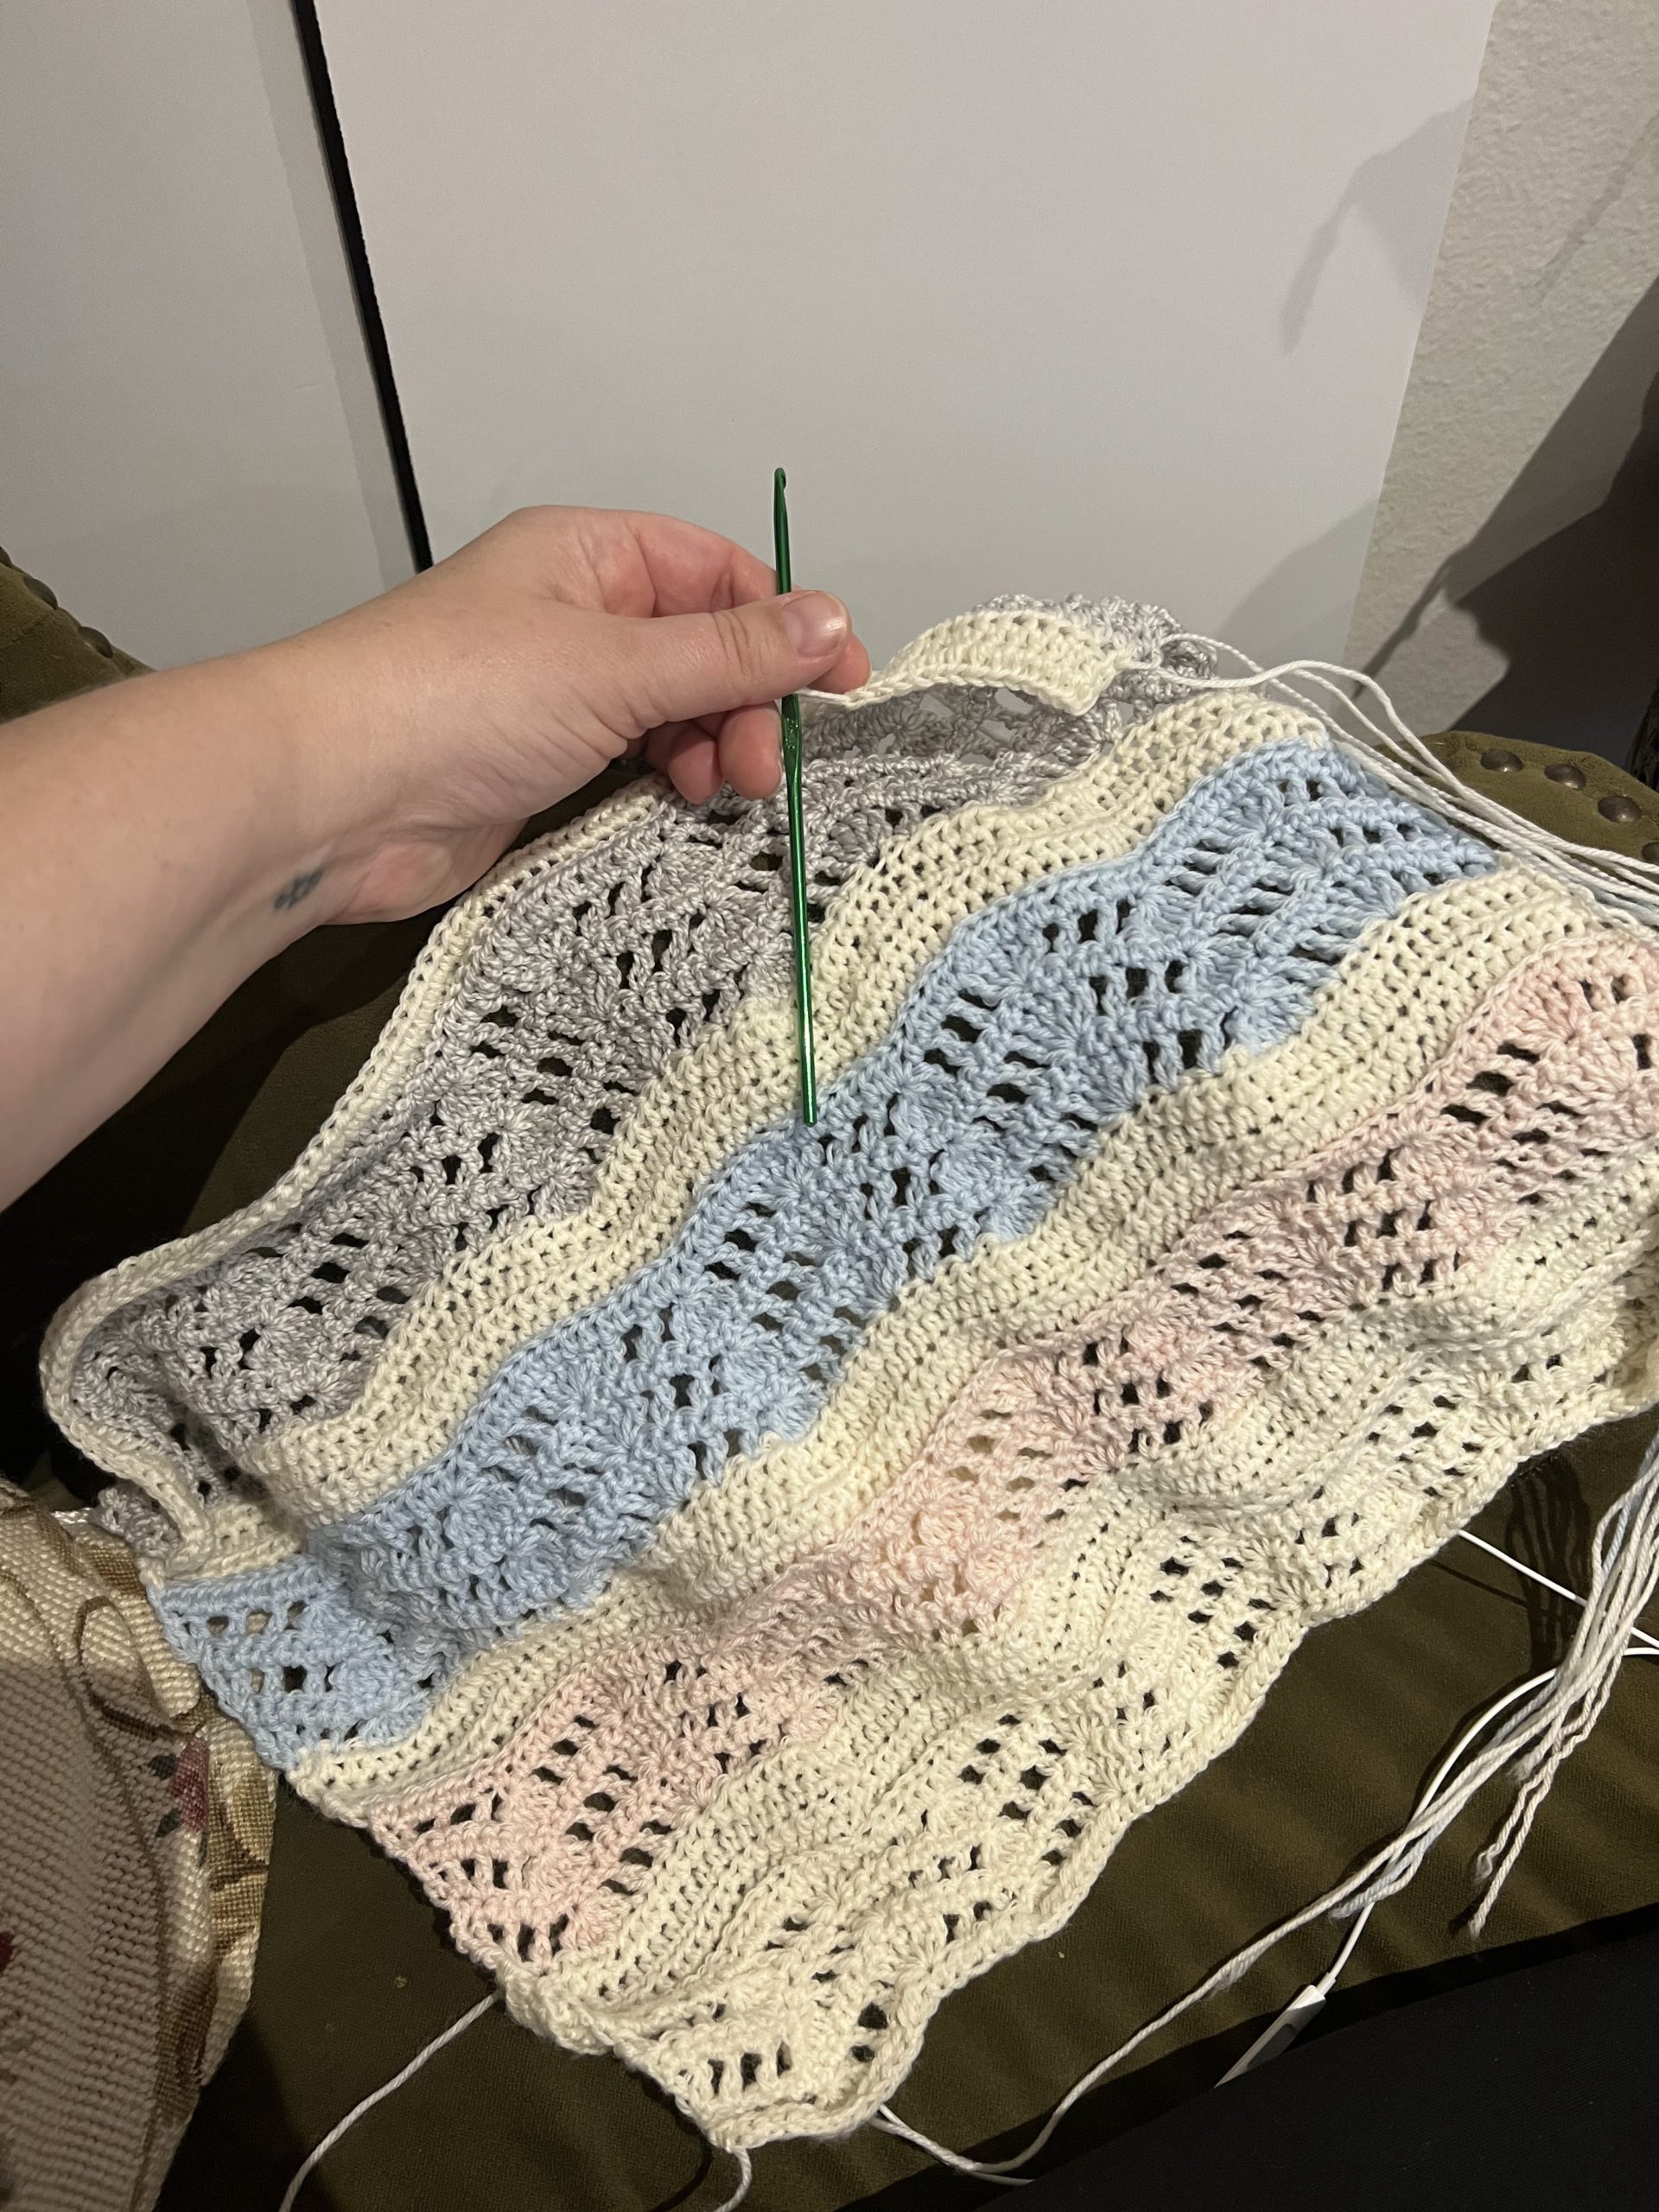 A partially finished lacy crochet wrap with stripes in cream, pink, blue, and gray. My left hand with the crochet hook is visible at top left.